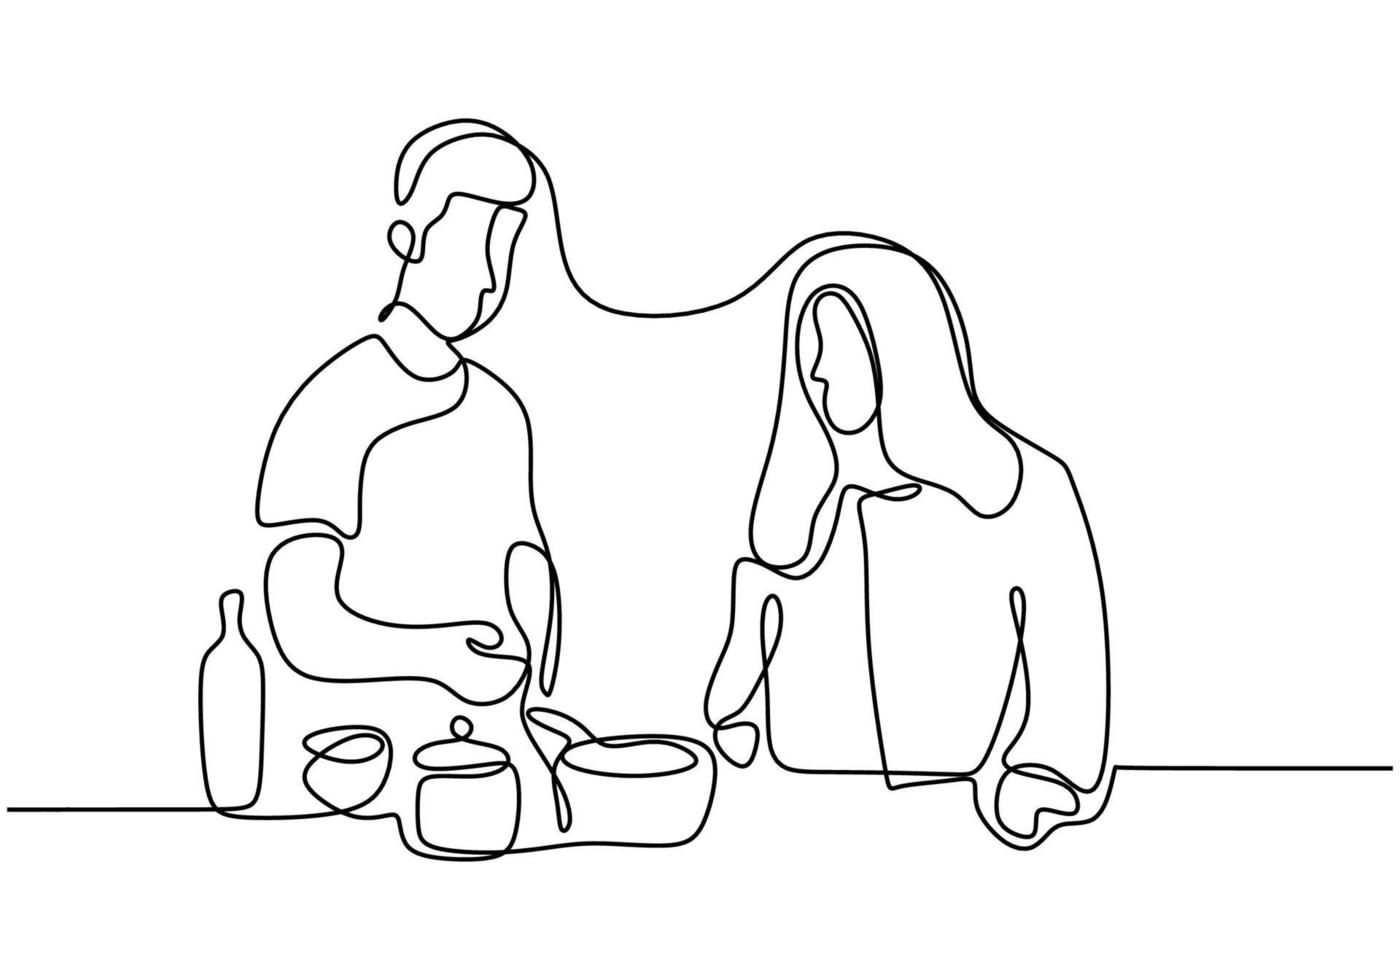 People cooking continuous one line drawing design minimalism style. vector